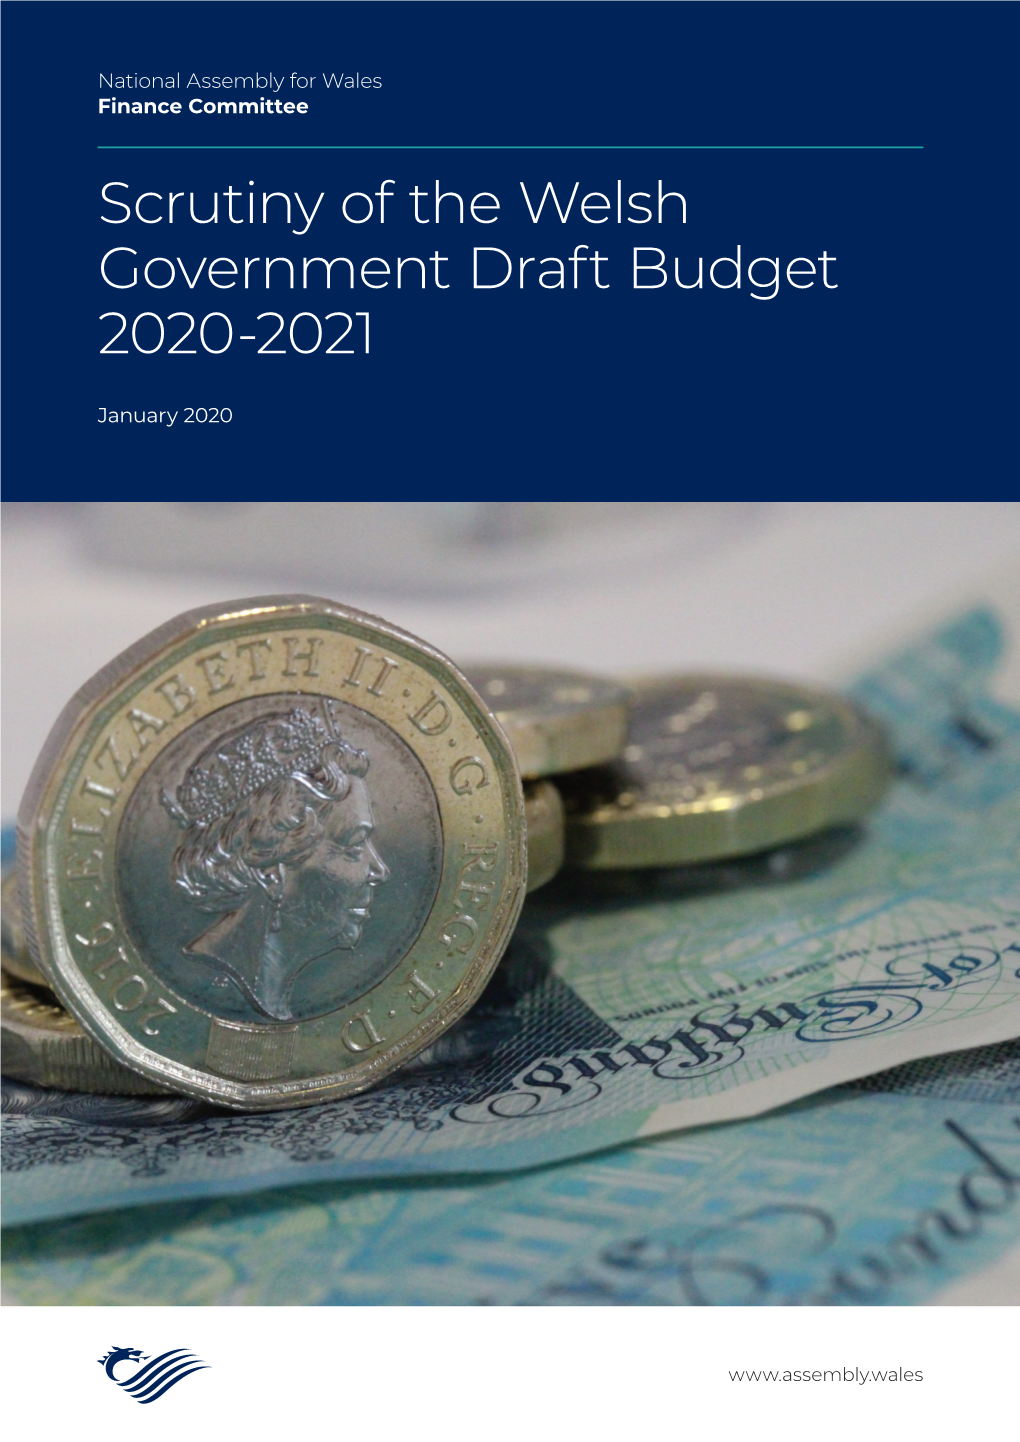 Scrutiny of the Welsh Government Draft Budget 2020-2021